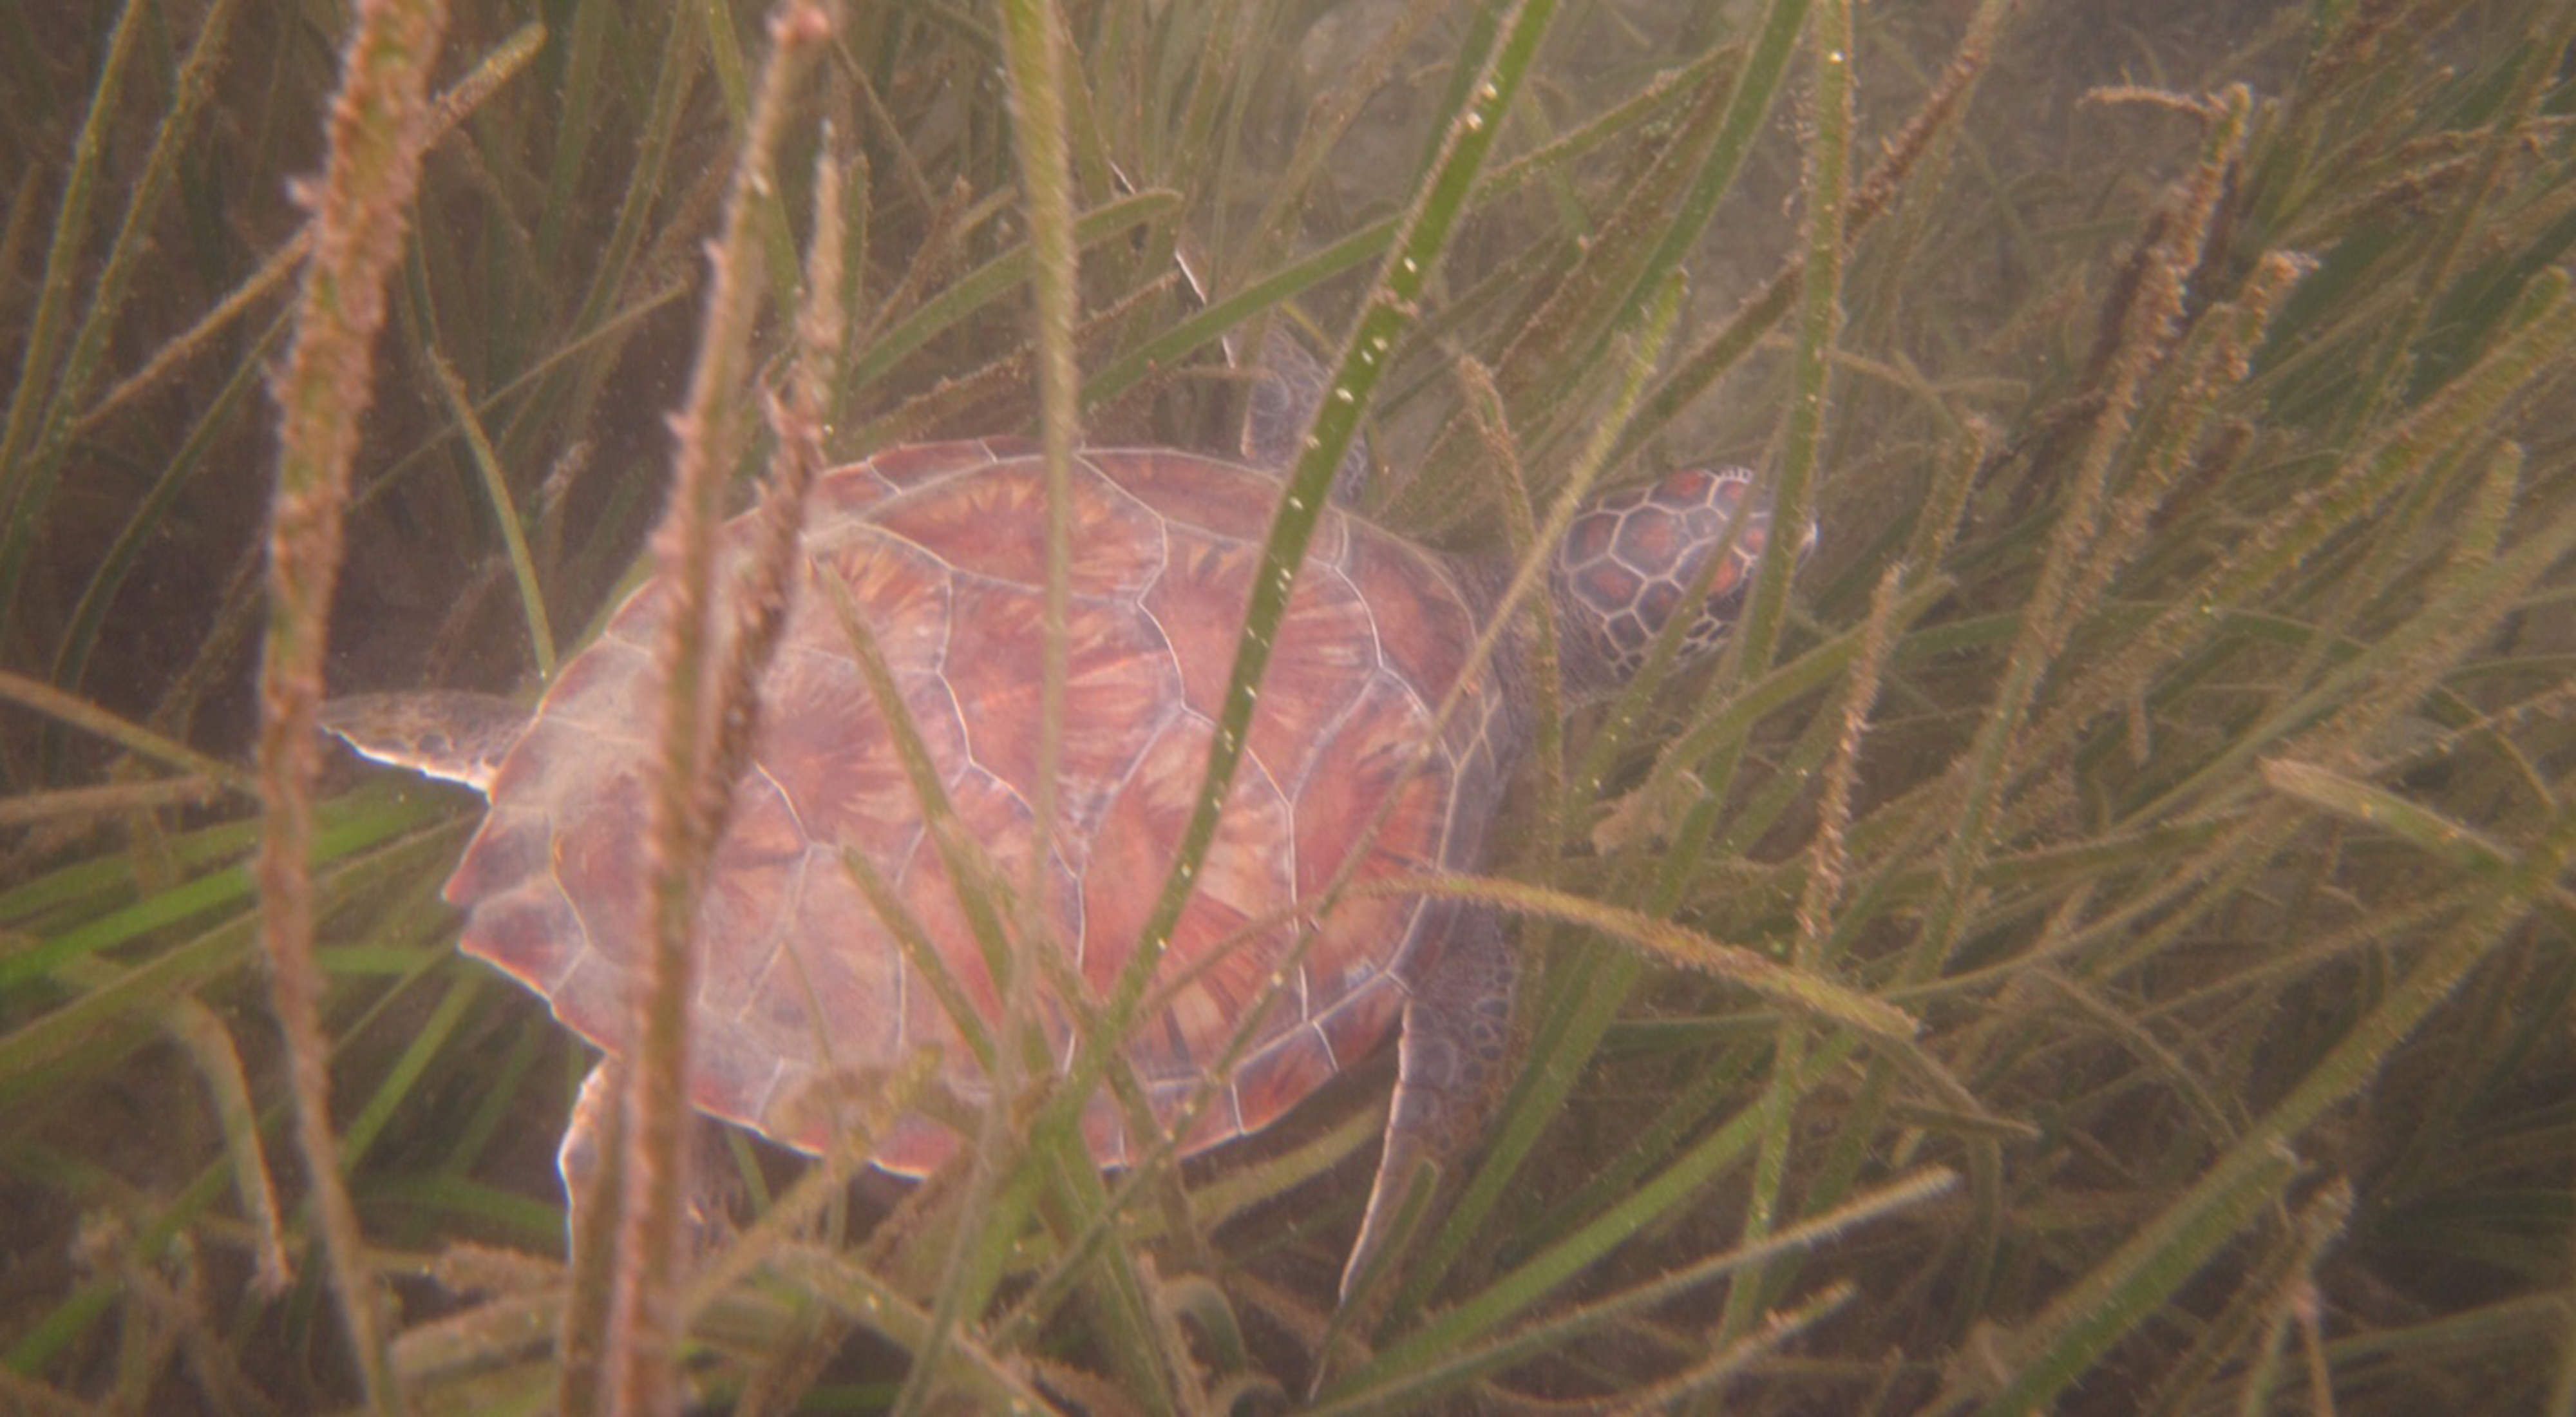 A turtle rests in seagrass.